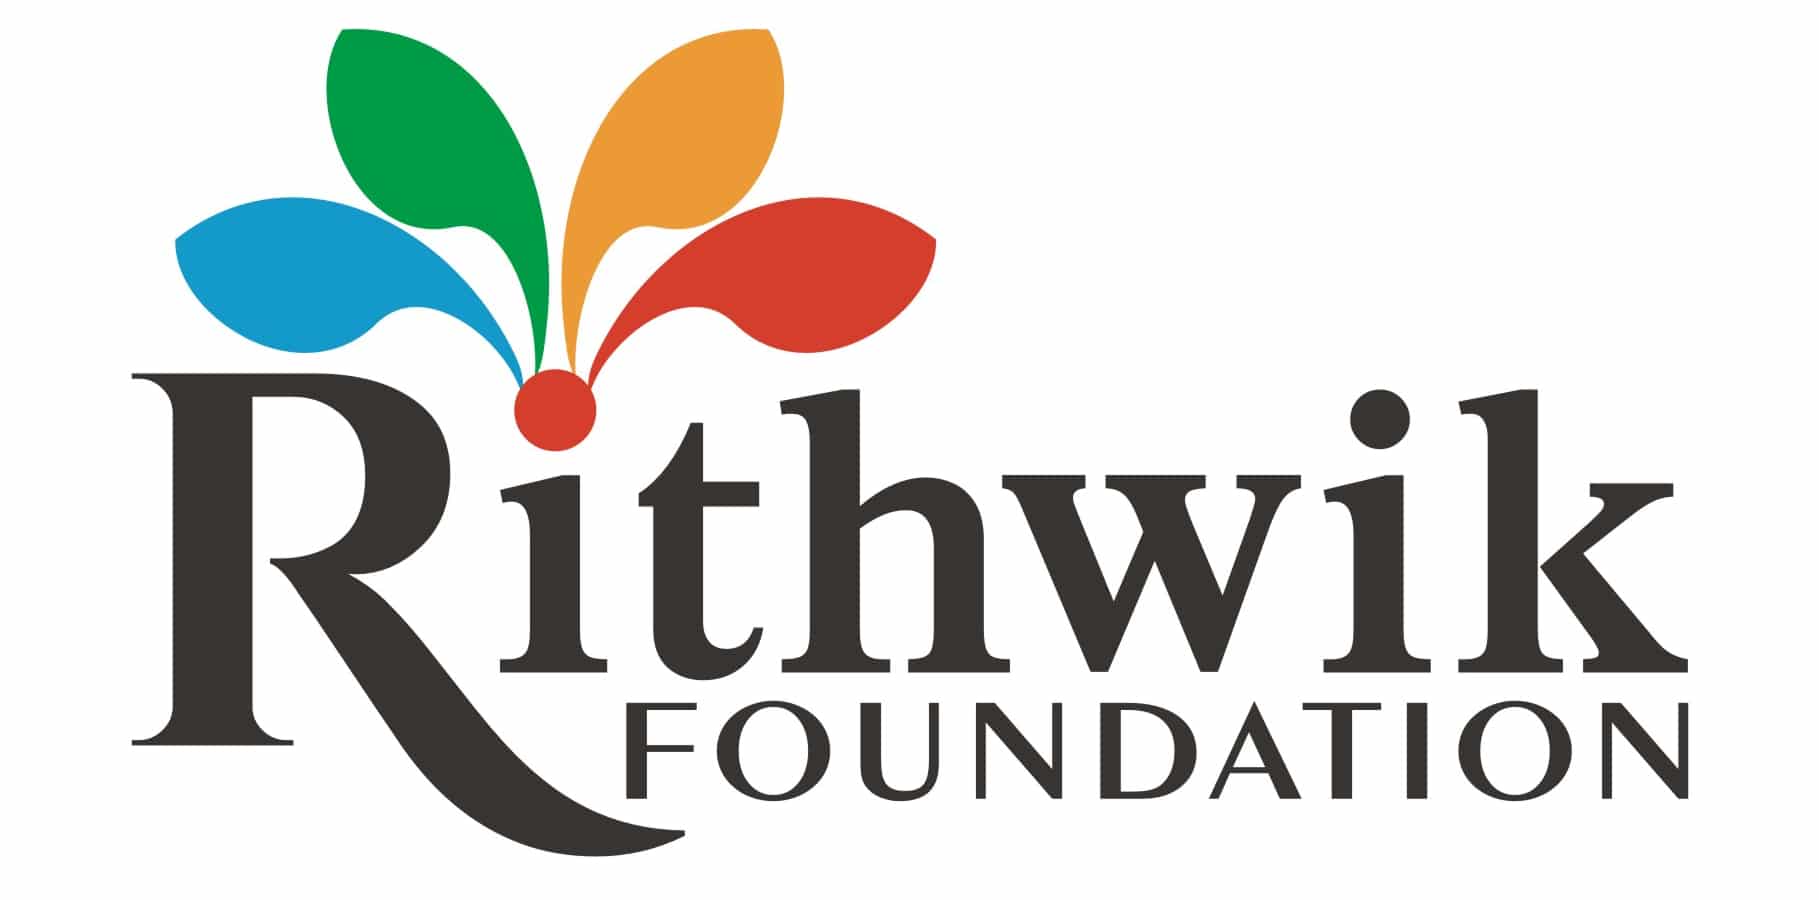 Rithwik Foundation for Performing Arts